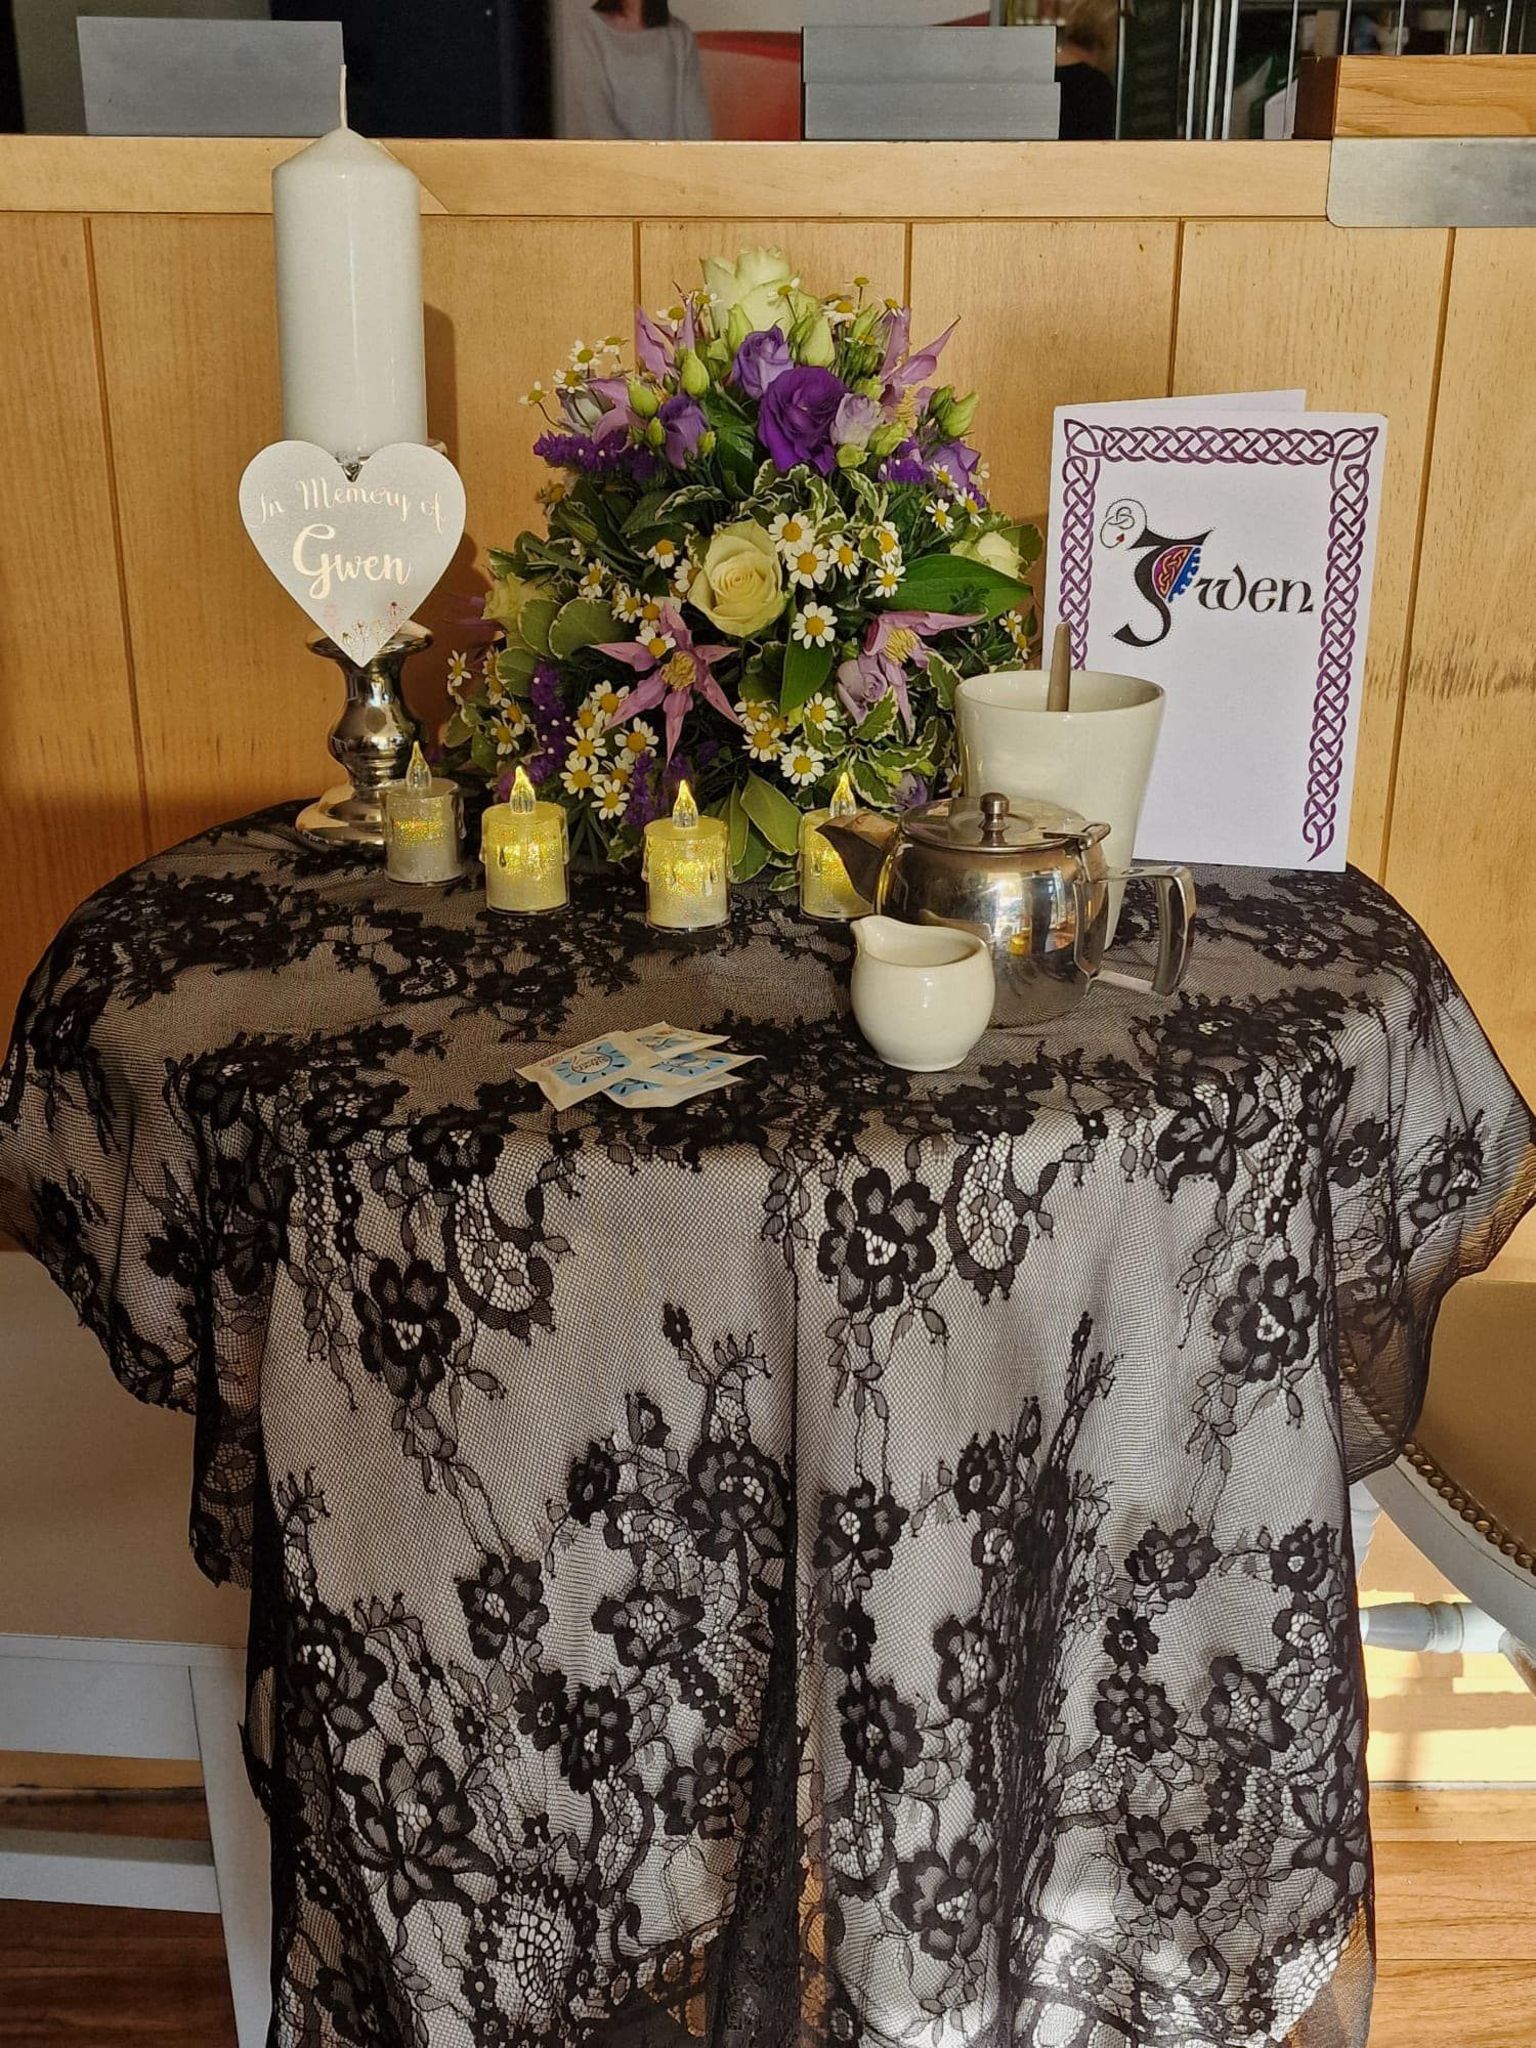 A table laid with flowers, candles, cards and a pot of tea, which was done on the day of Gwendoline Wain's funeral